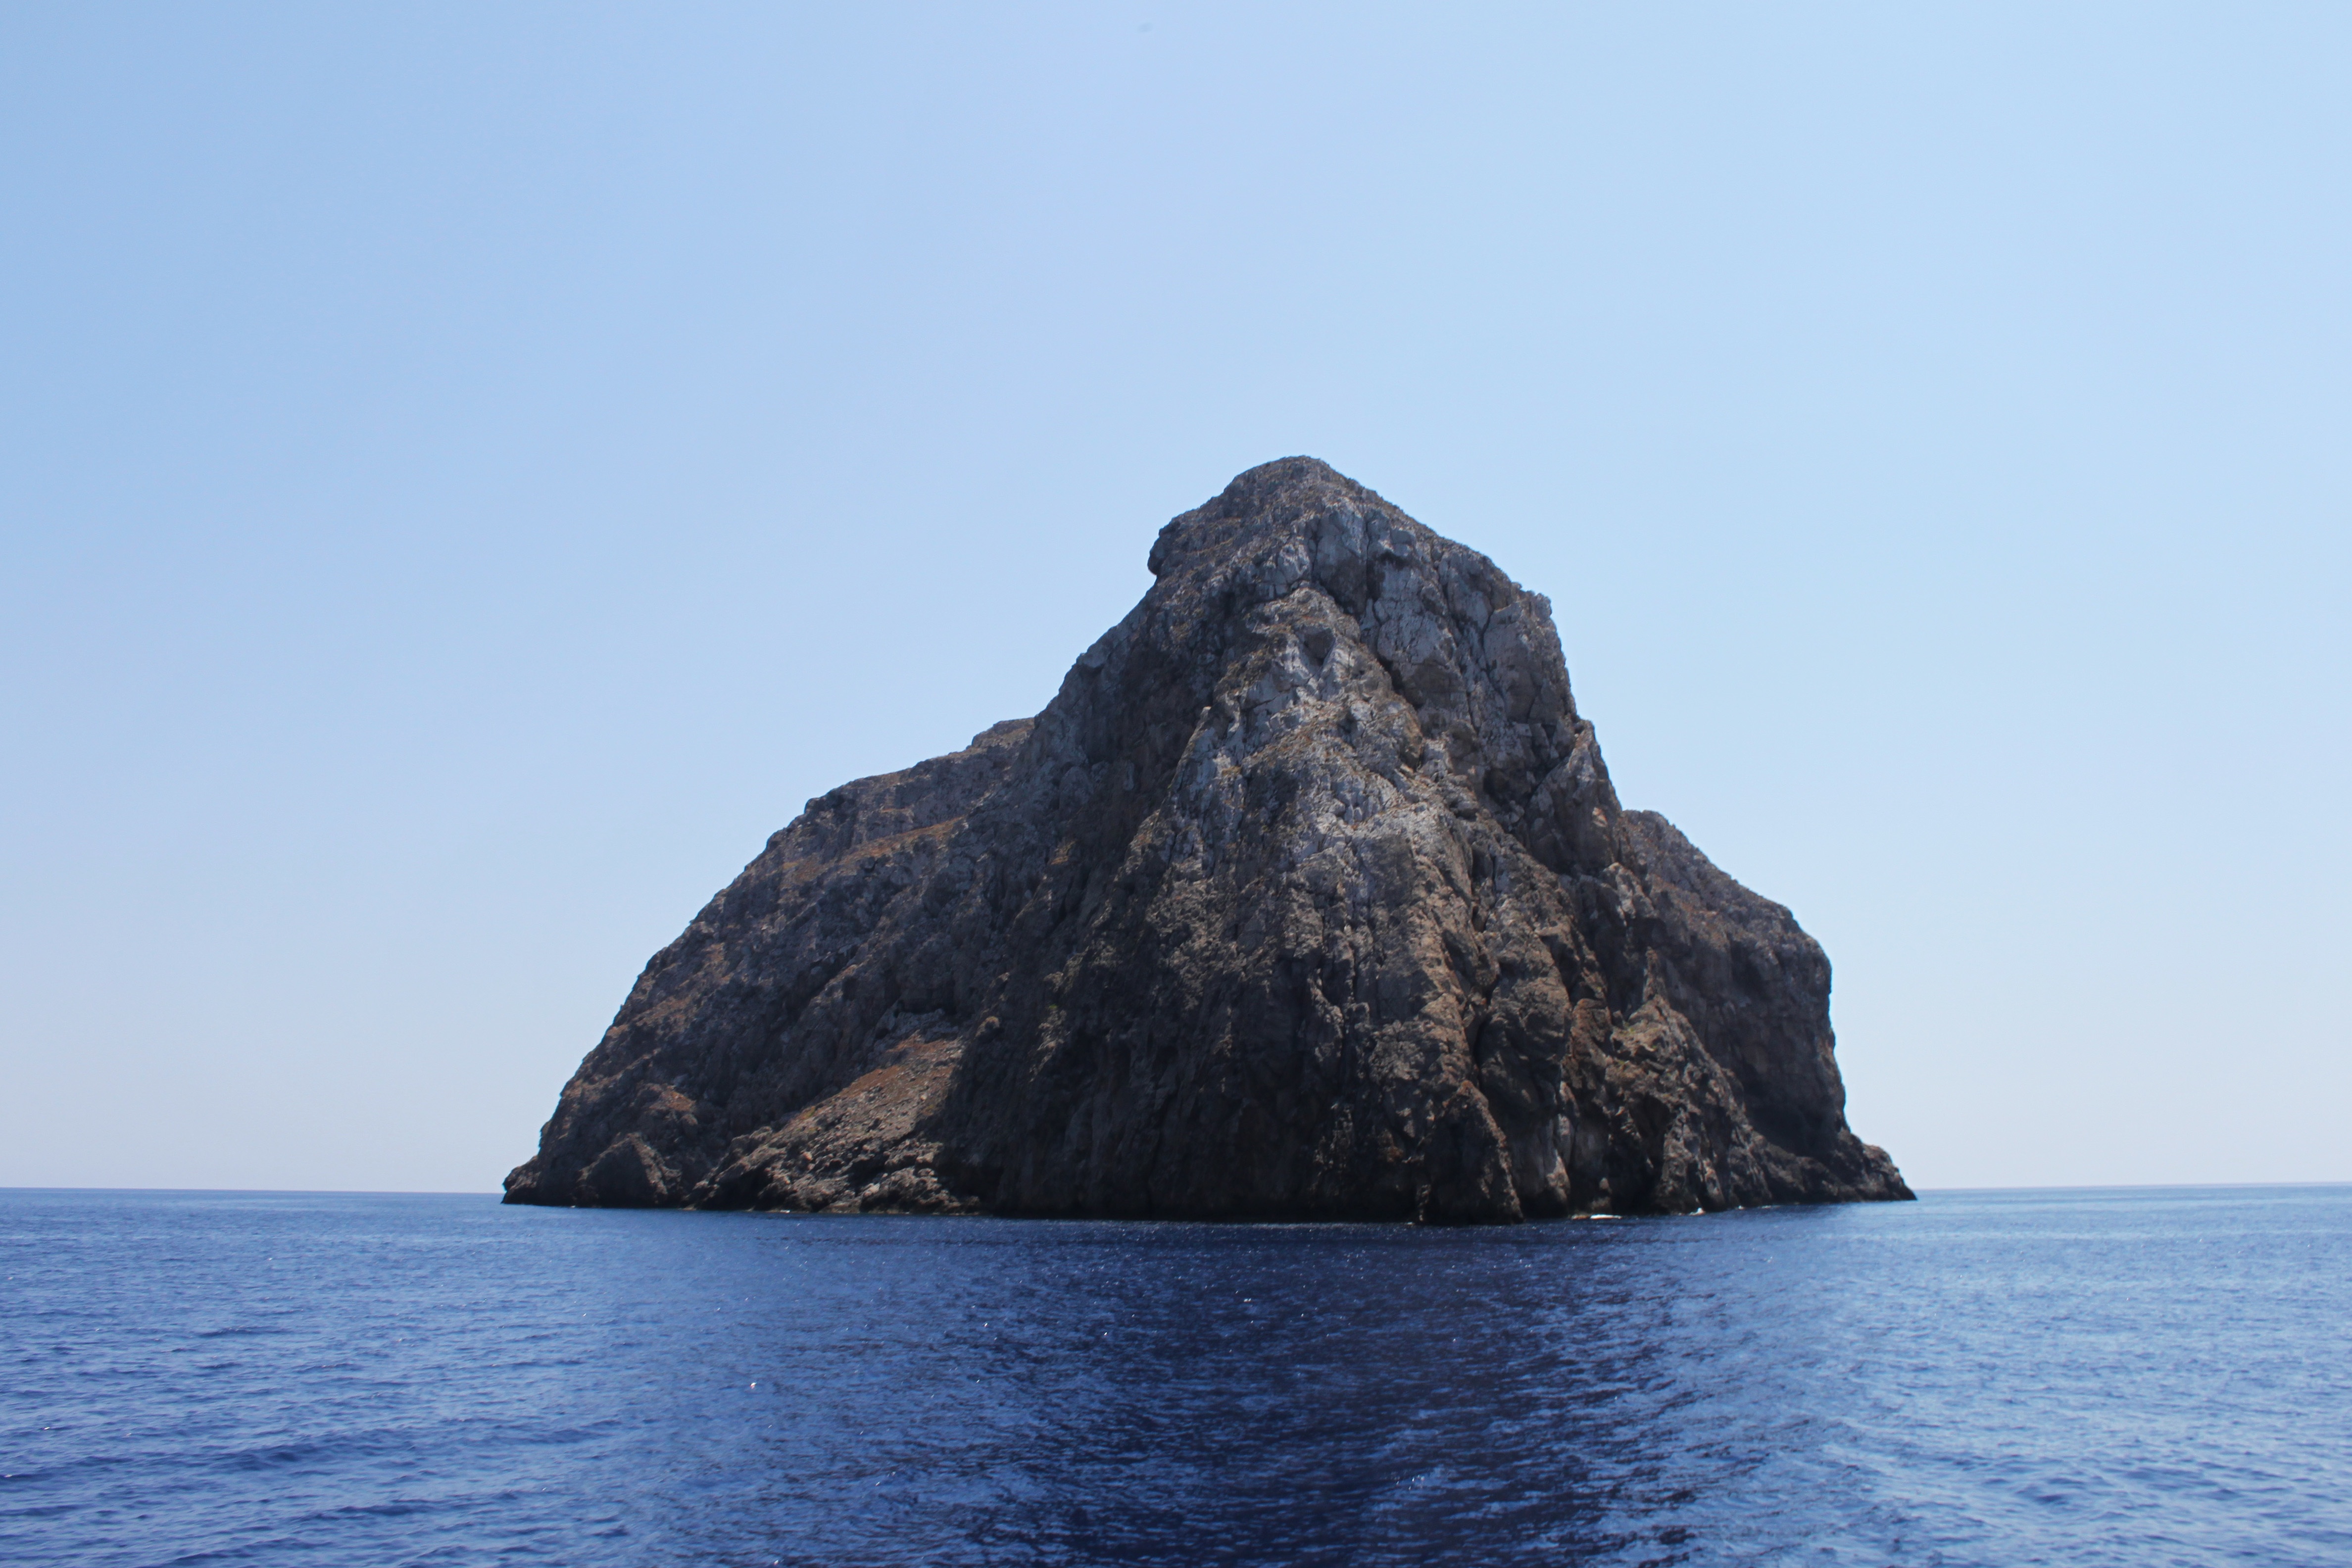 A huge rock in the middle of the sea near the shore